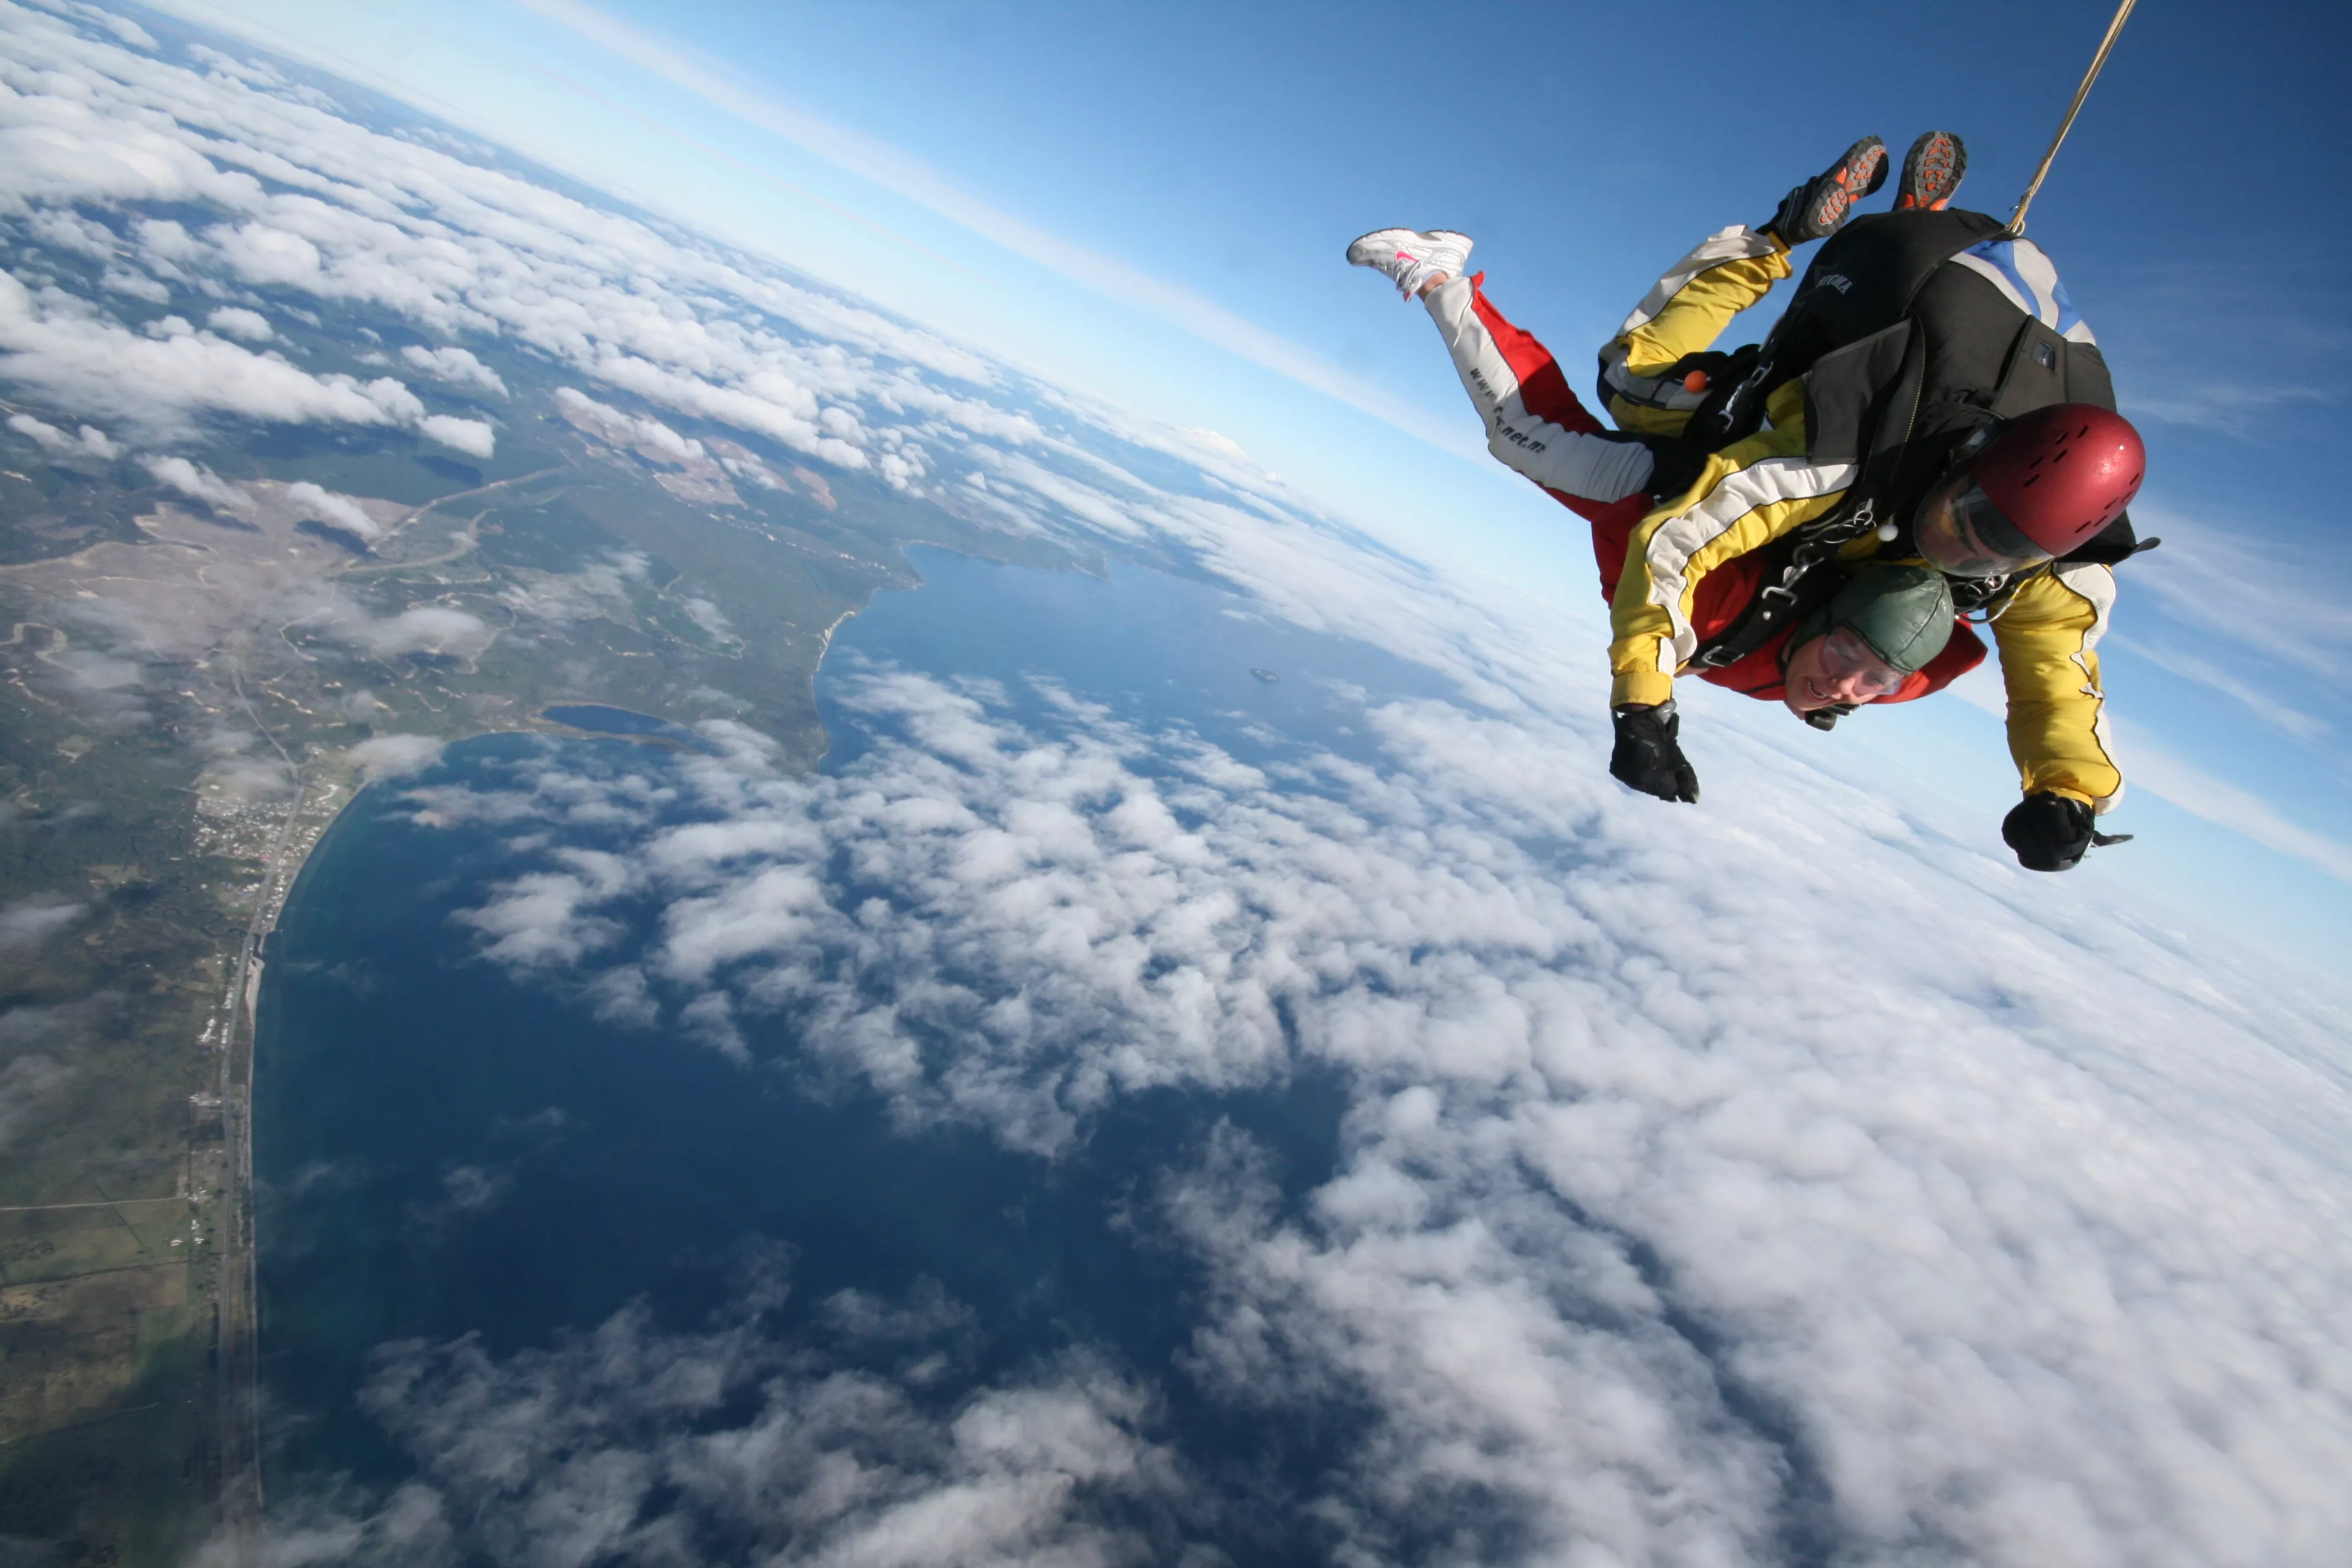 GoJump in Germany, Europe | Skydiving - Rated 4.5